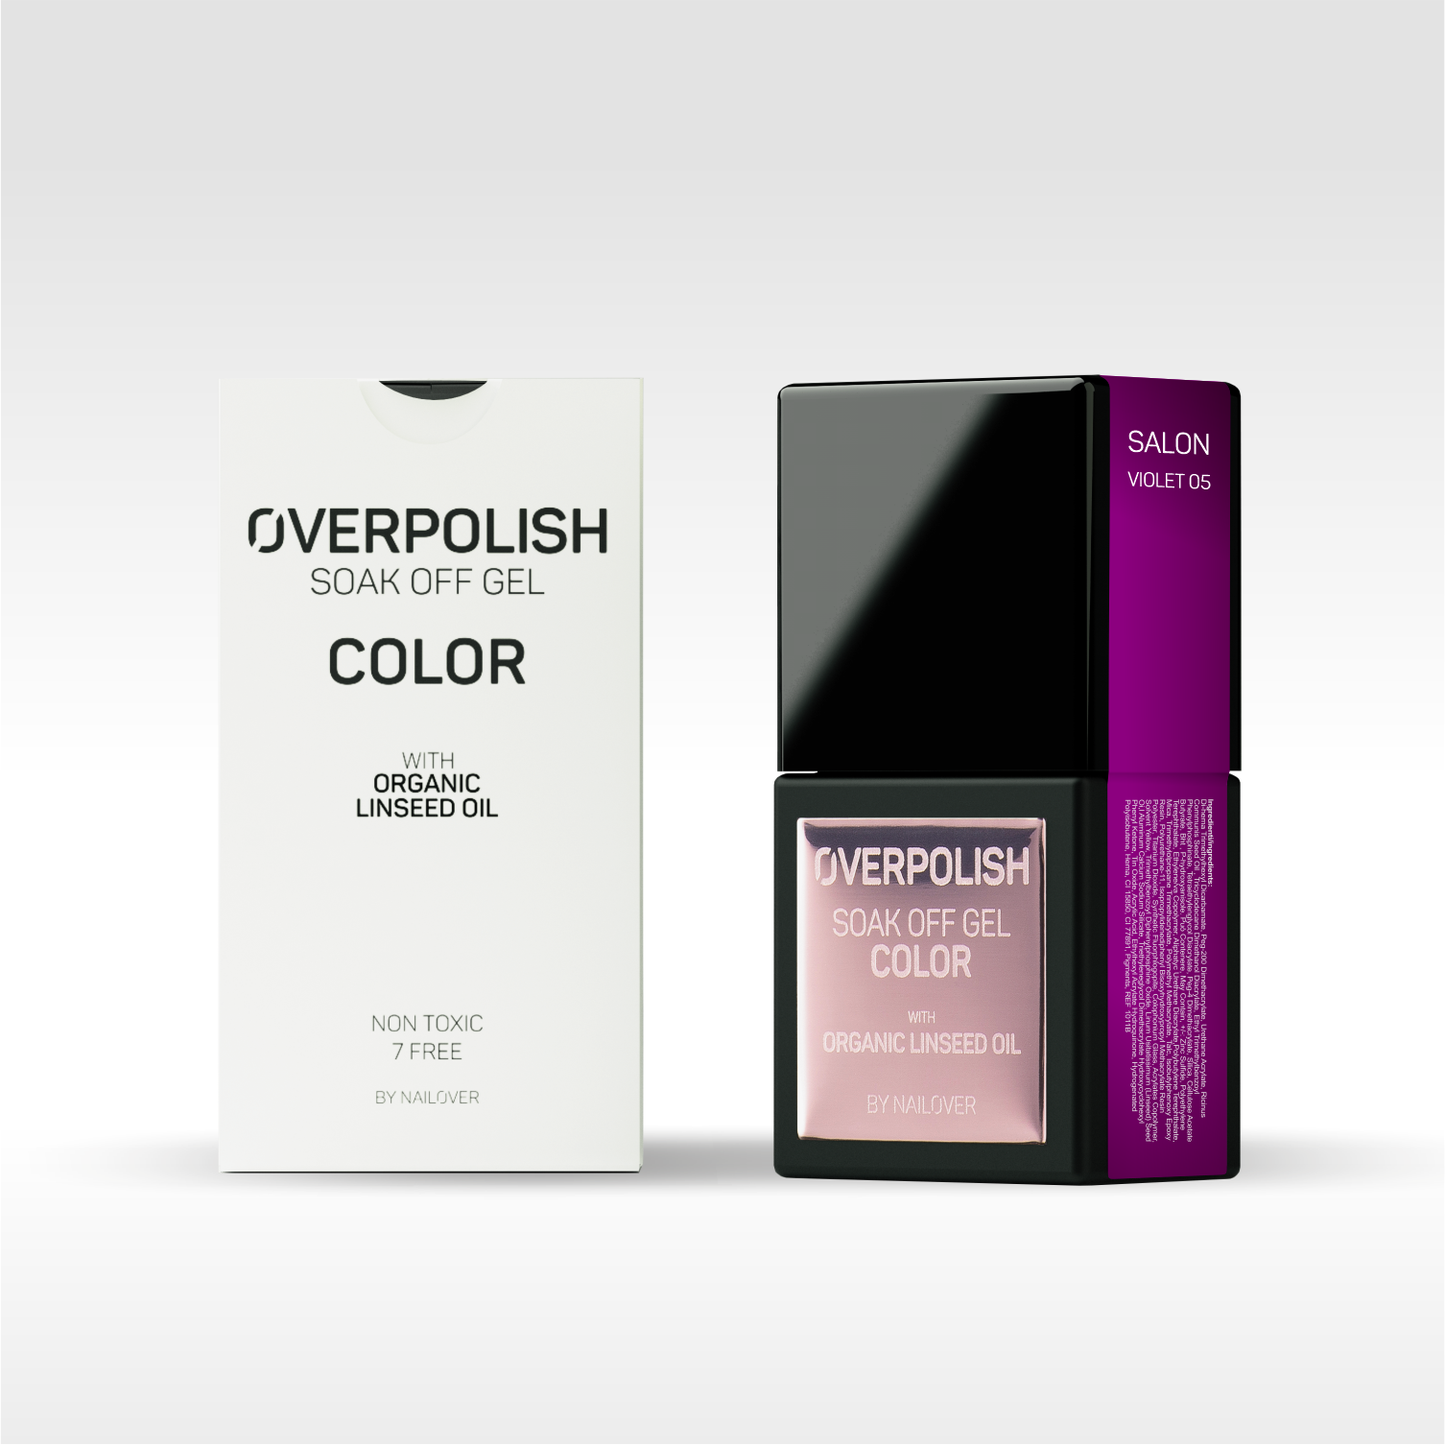 Overpolish Soak Off Gel Color - Violet Tones WITH ORGANIC LINSEED OIL